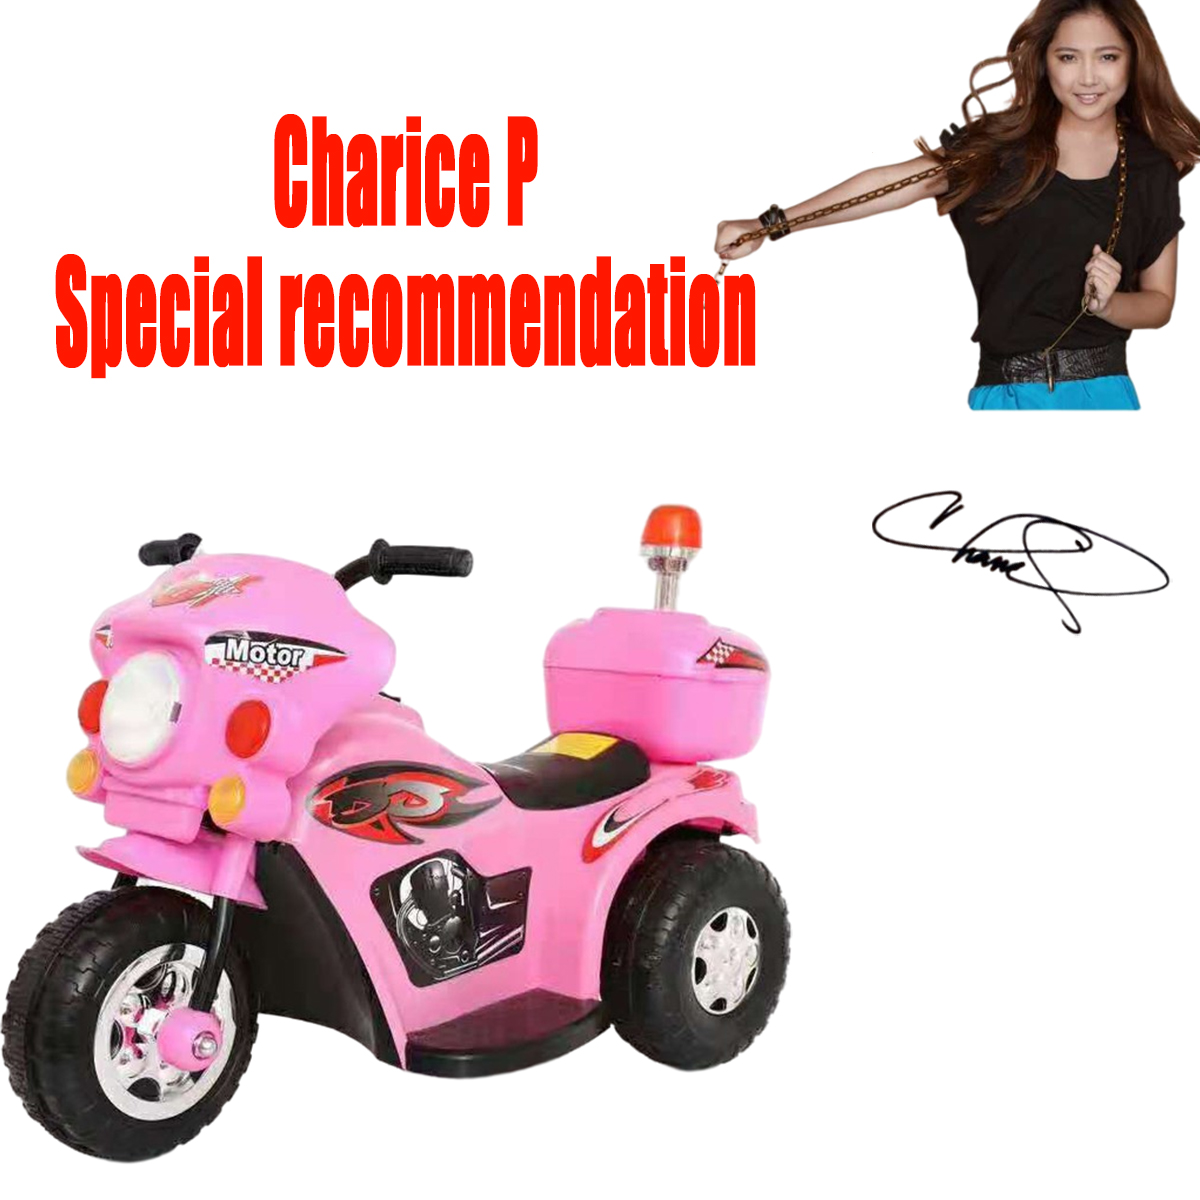 Kids Girls Ride-On Toy Motorcycle Rechargeable Tots Police Motorbike Pink Purple 